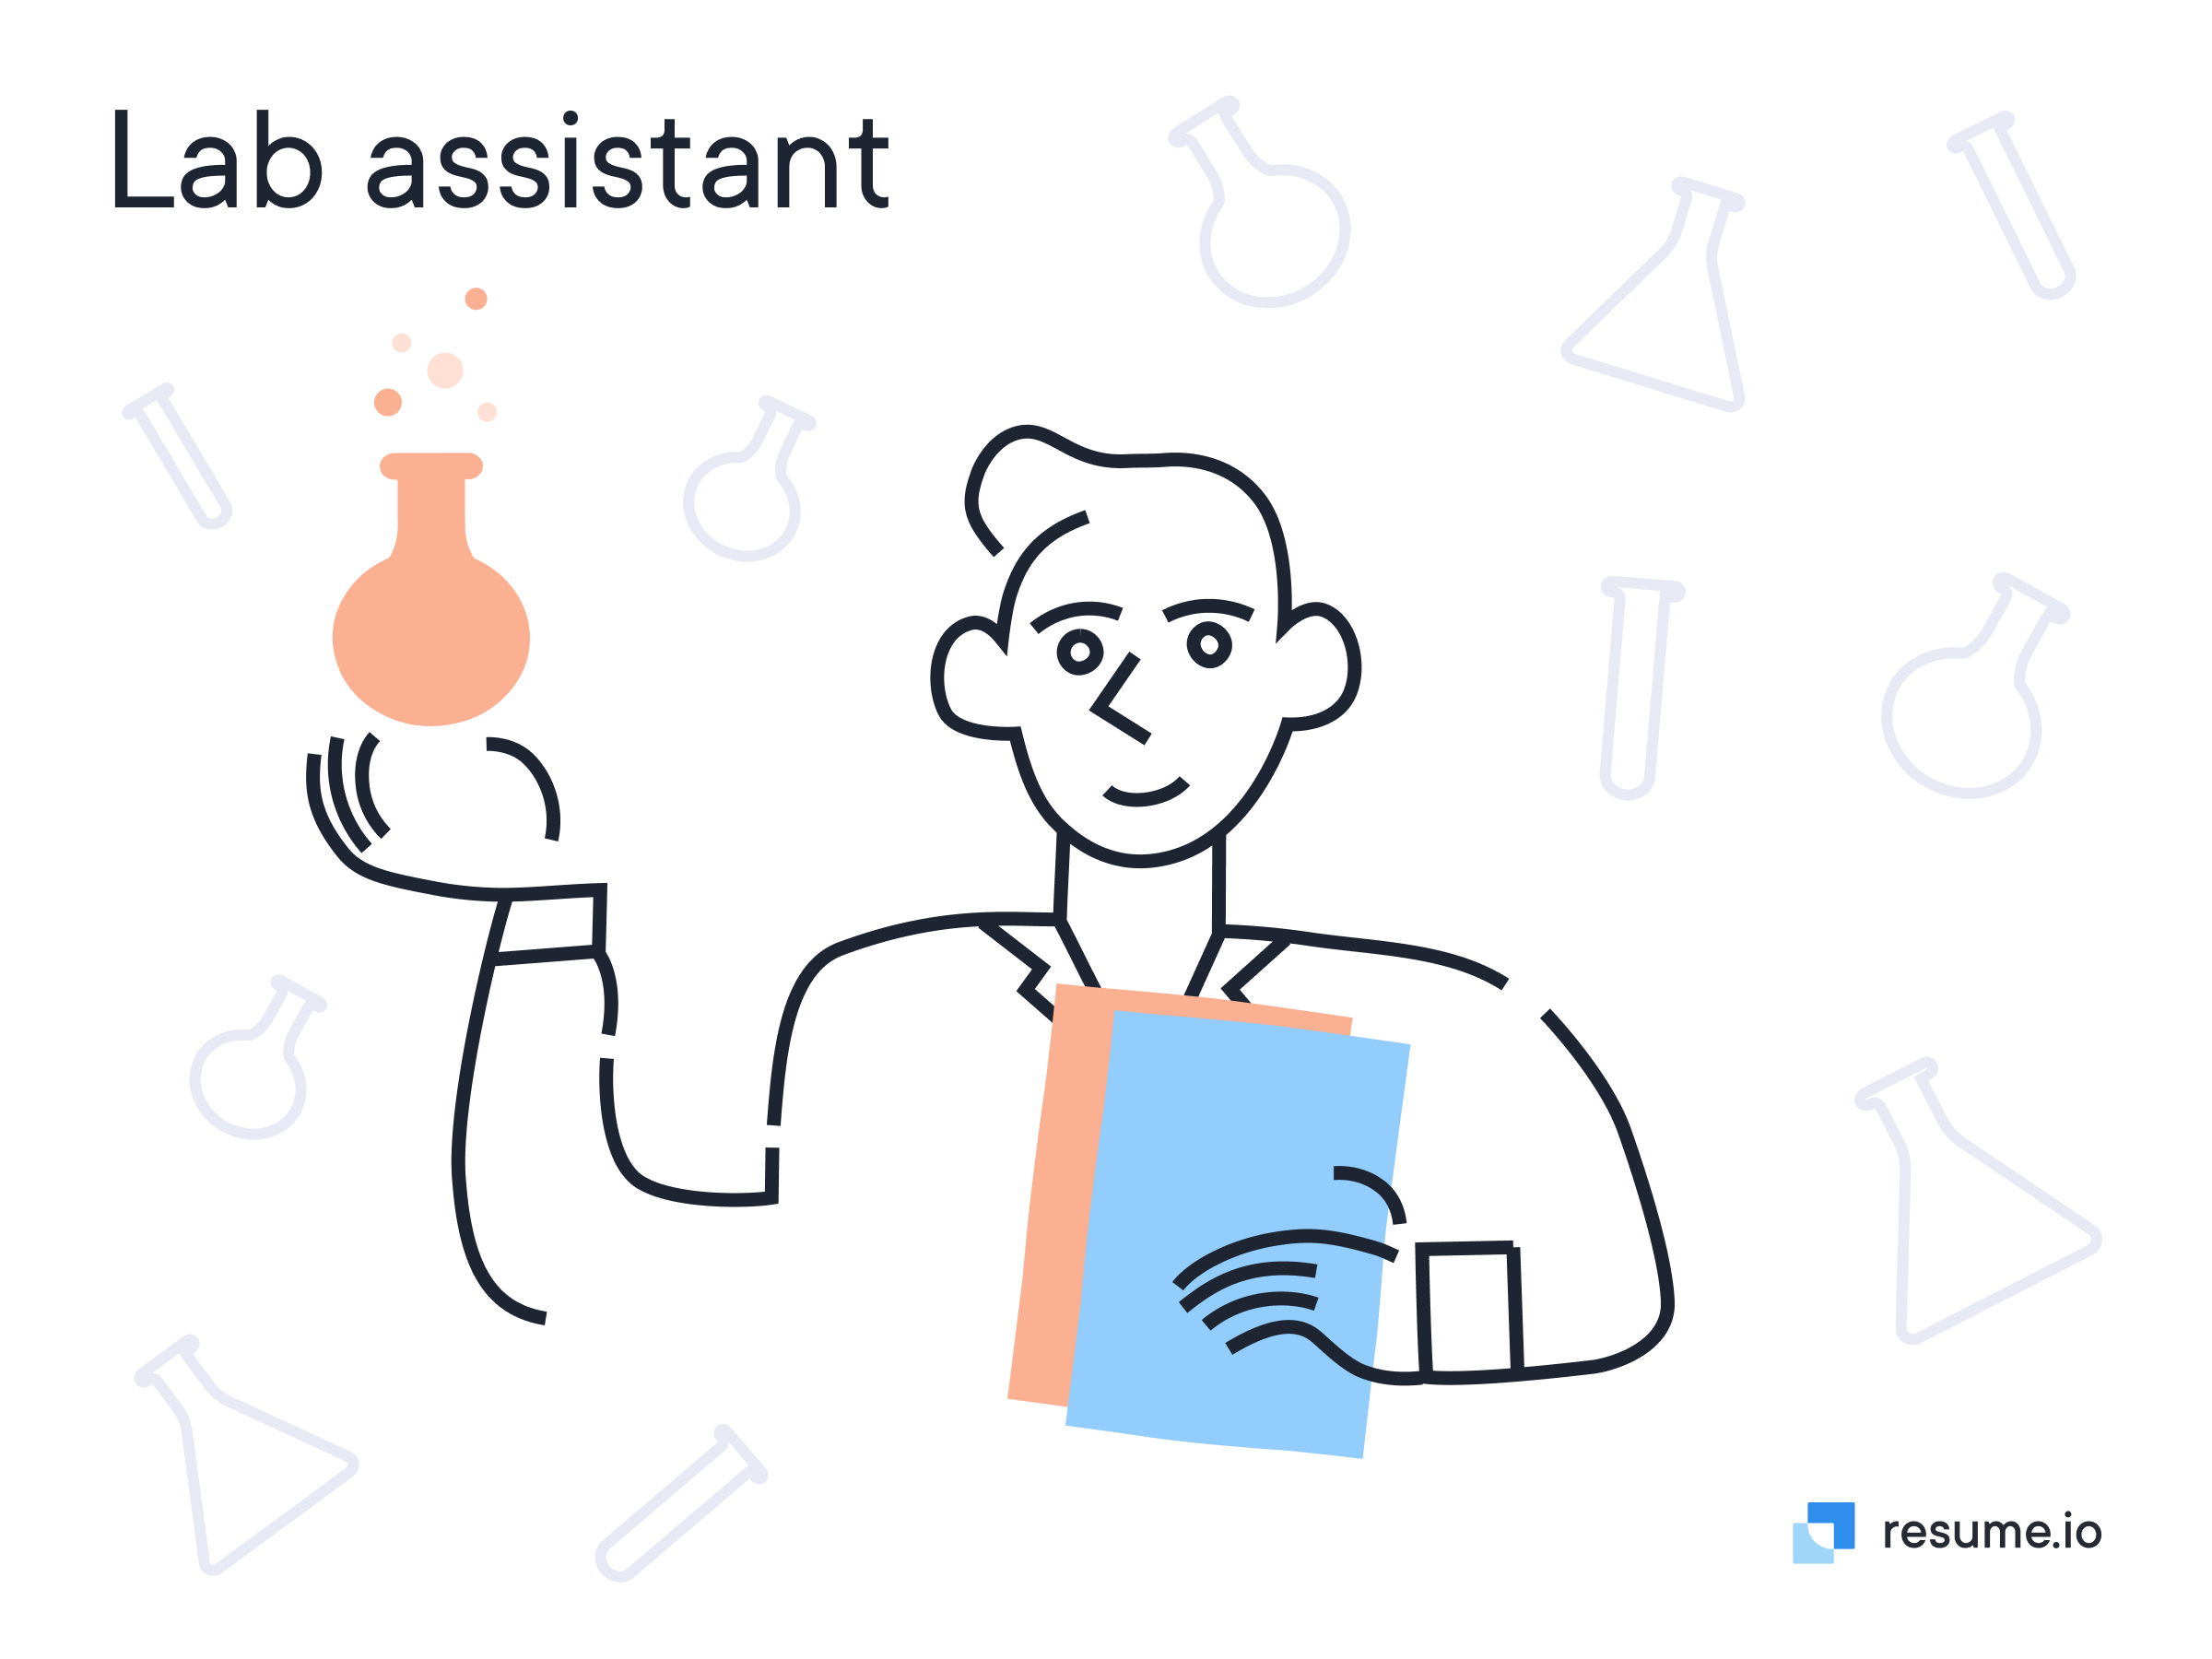 Illustrated lab assistant holding papers and erlenmeyer